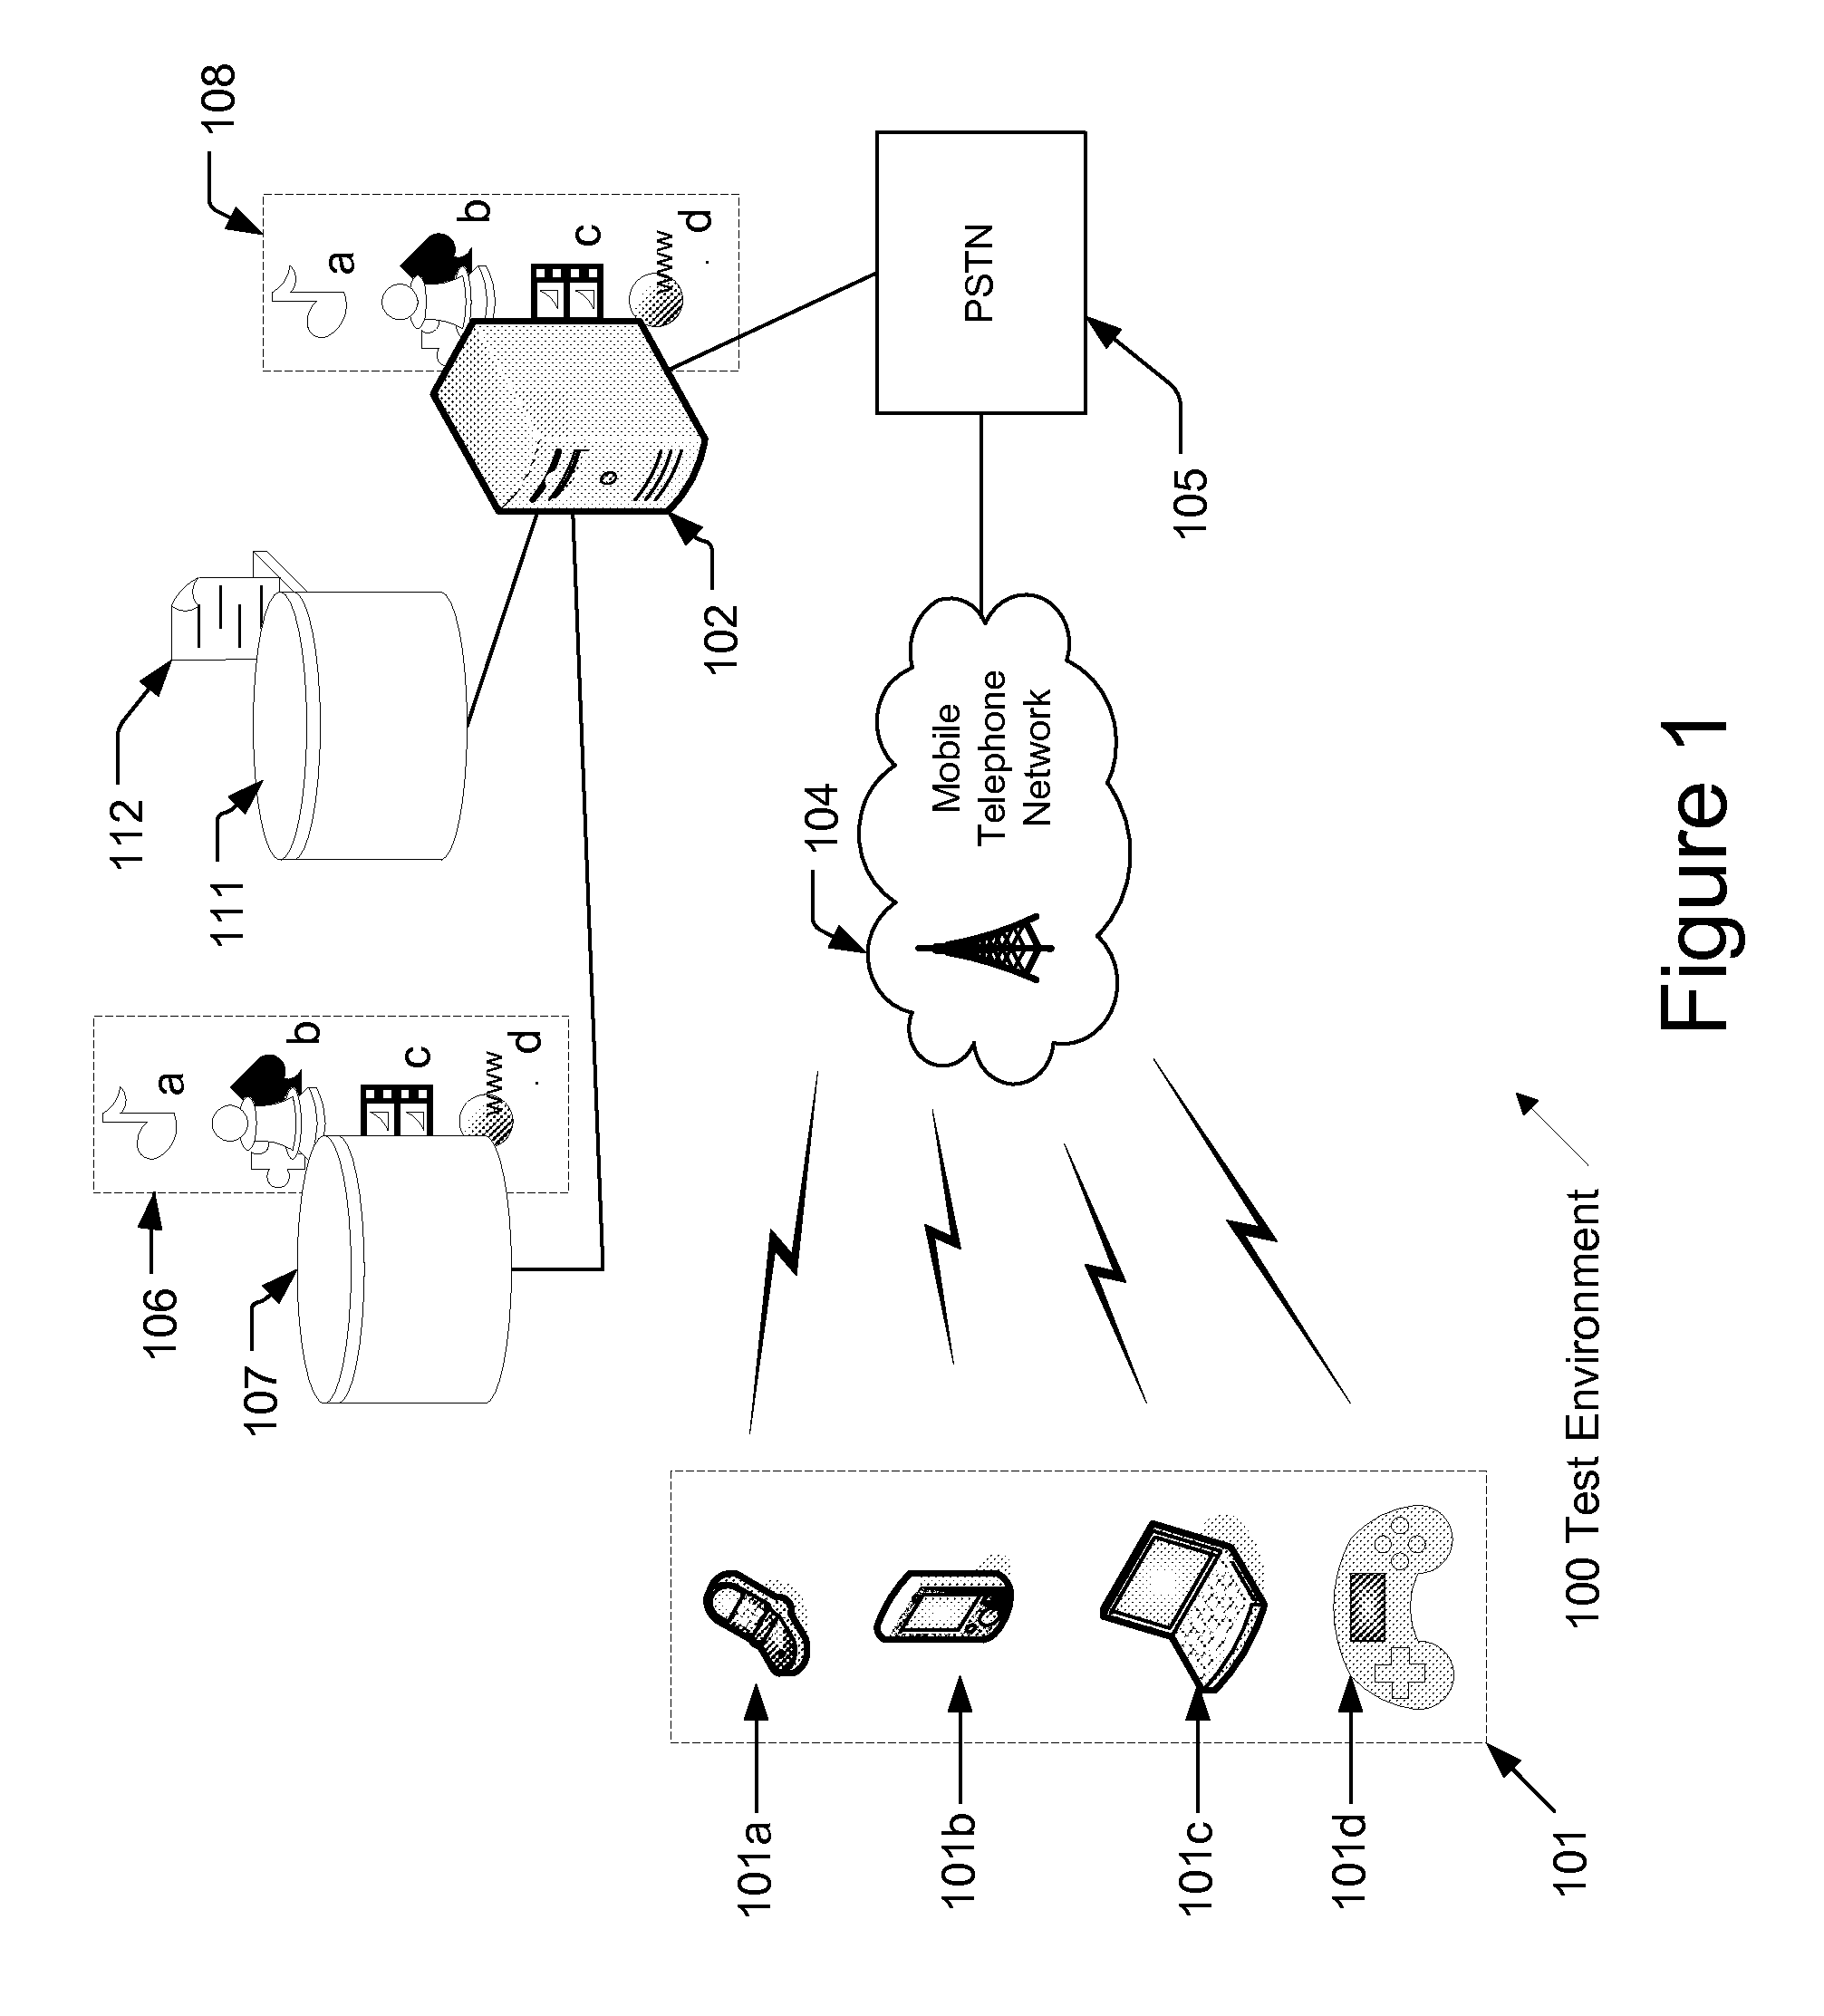 System and Method for Determining Quality of Service of a Mobile Device